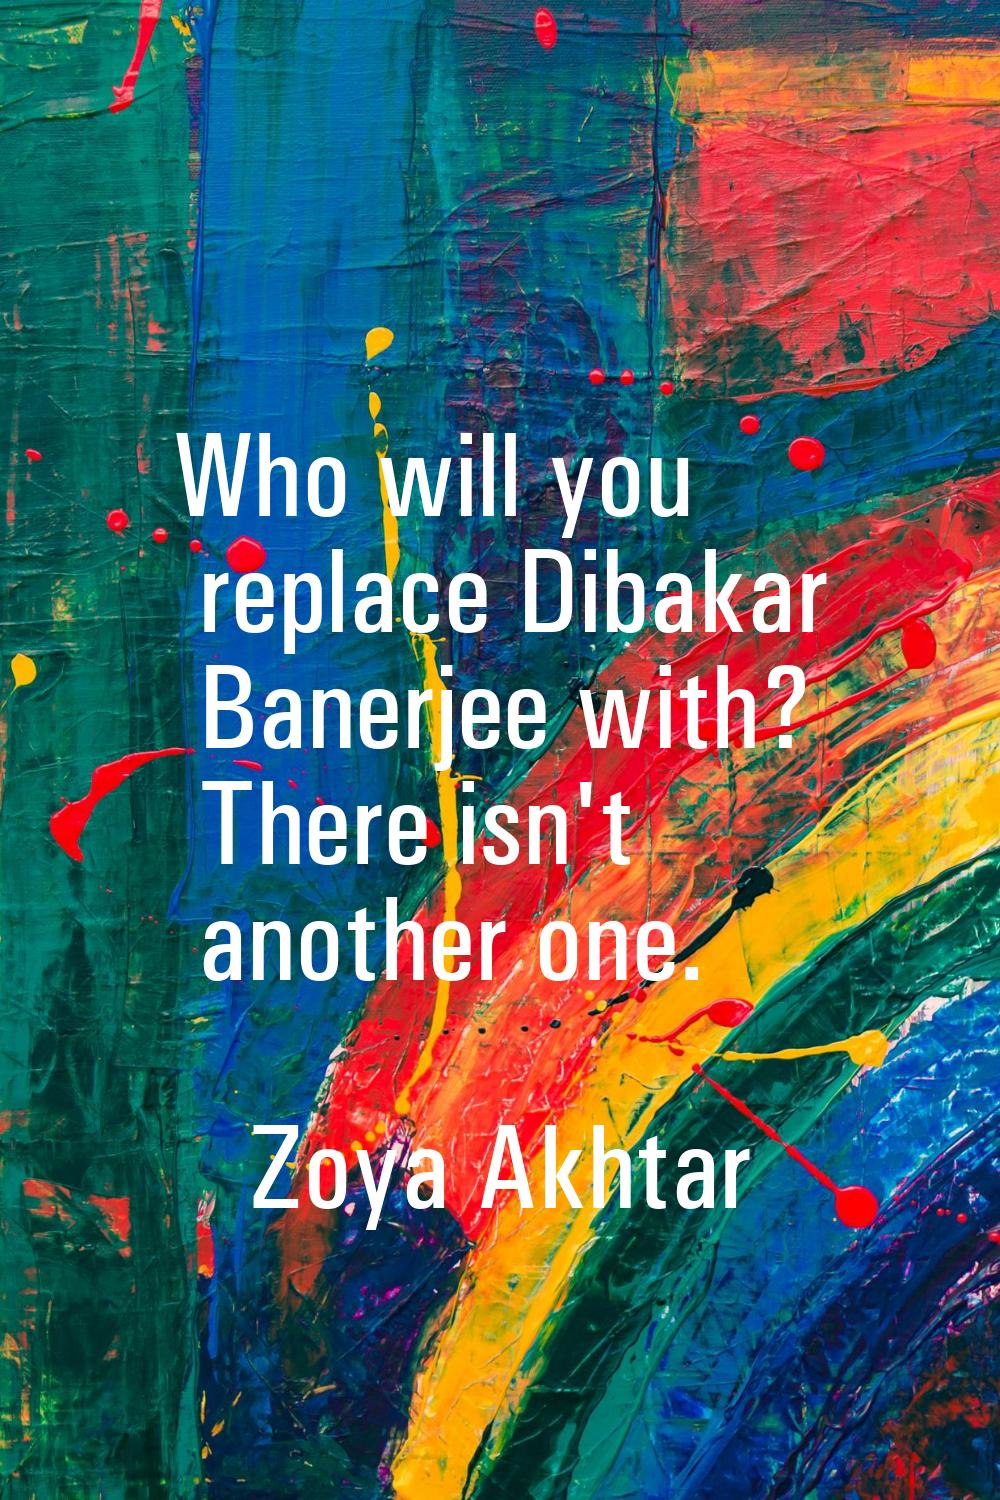 Who will you replace Dibakar Banerjee with? There isn't another one.